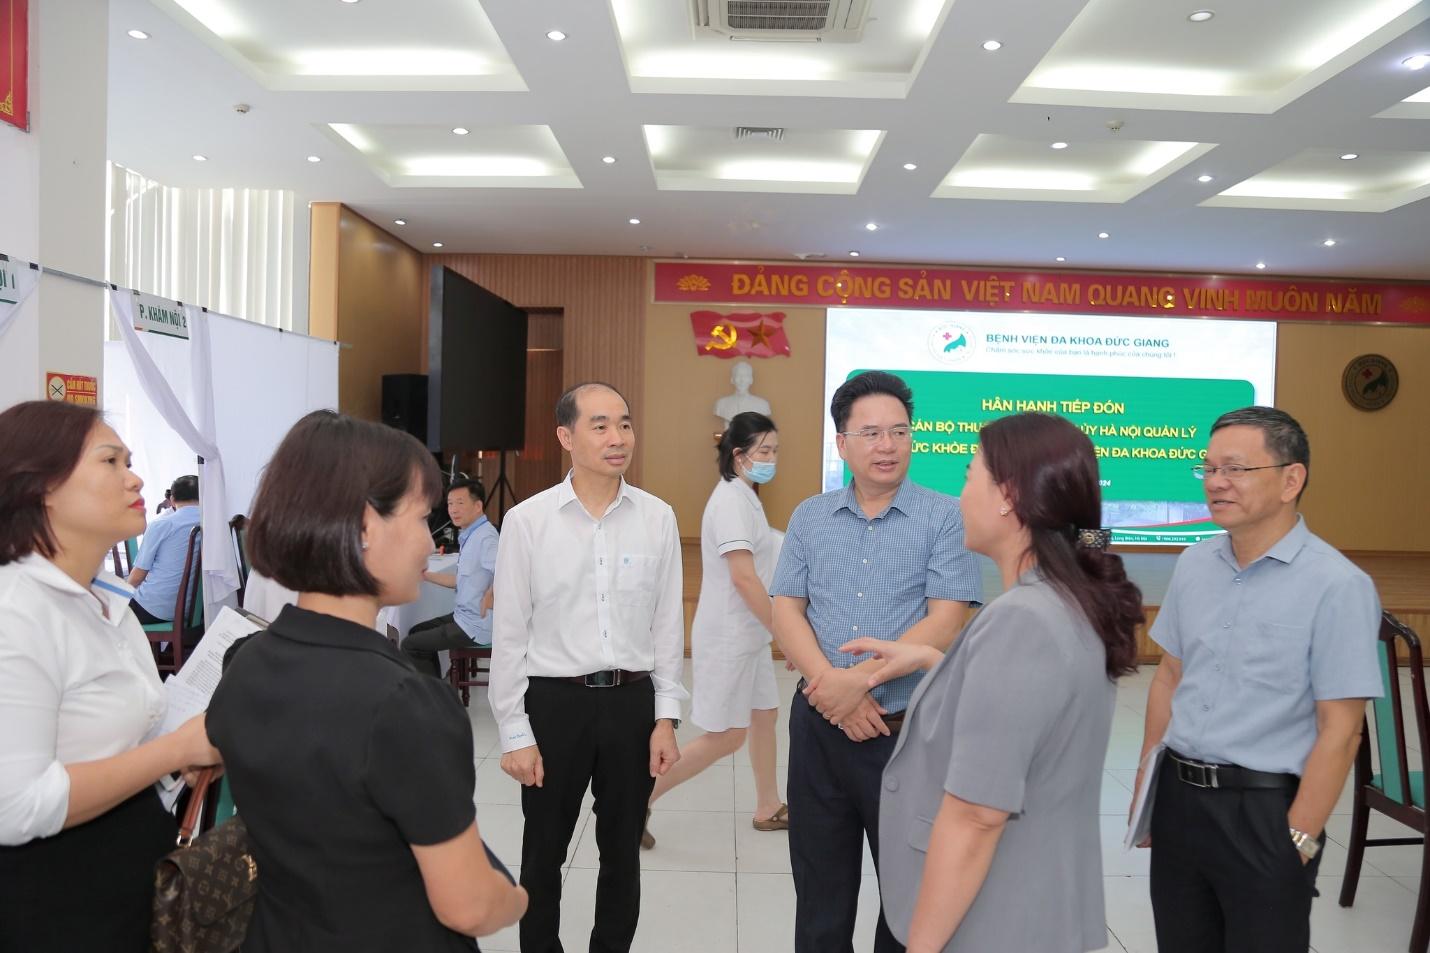 /images/companies/benhvienducgiang/common/hoat-dong-benh-vien/to-chuc-kham-suc-khoe-dinh-ky-nam-2024-doi-voi-can-bo-thuoc-dien-ban-thuong-vu-thanh-uy-quan-ly-can-bo-lao-thanh-cach-1.jpg